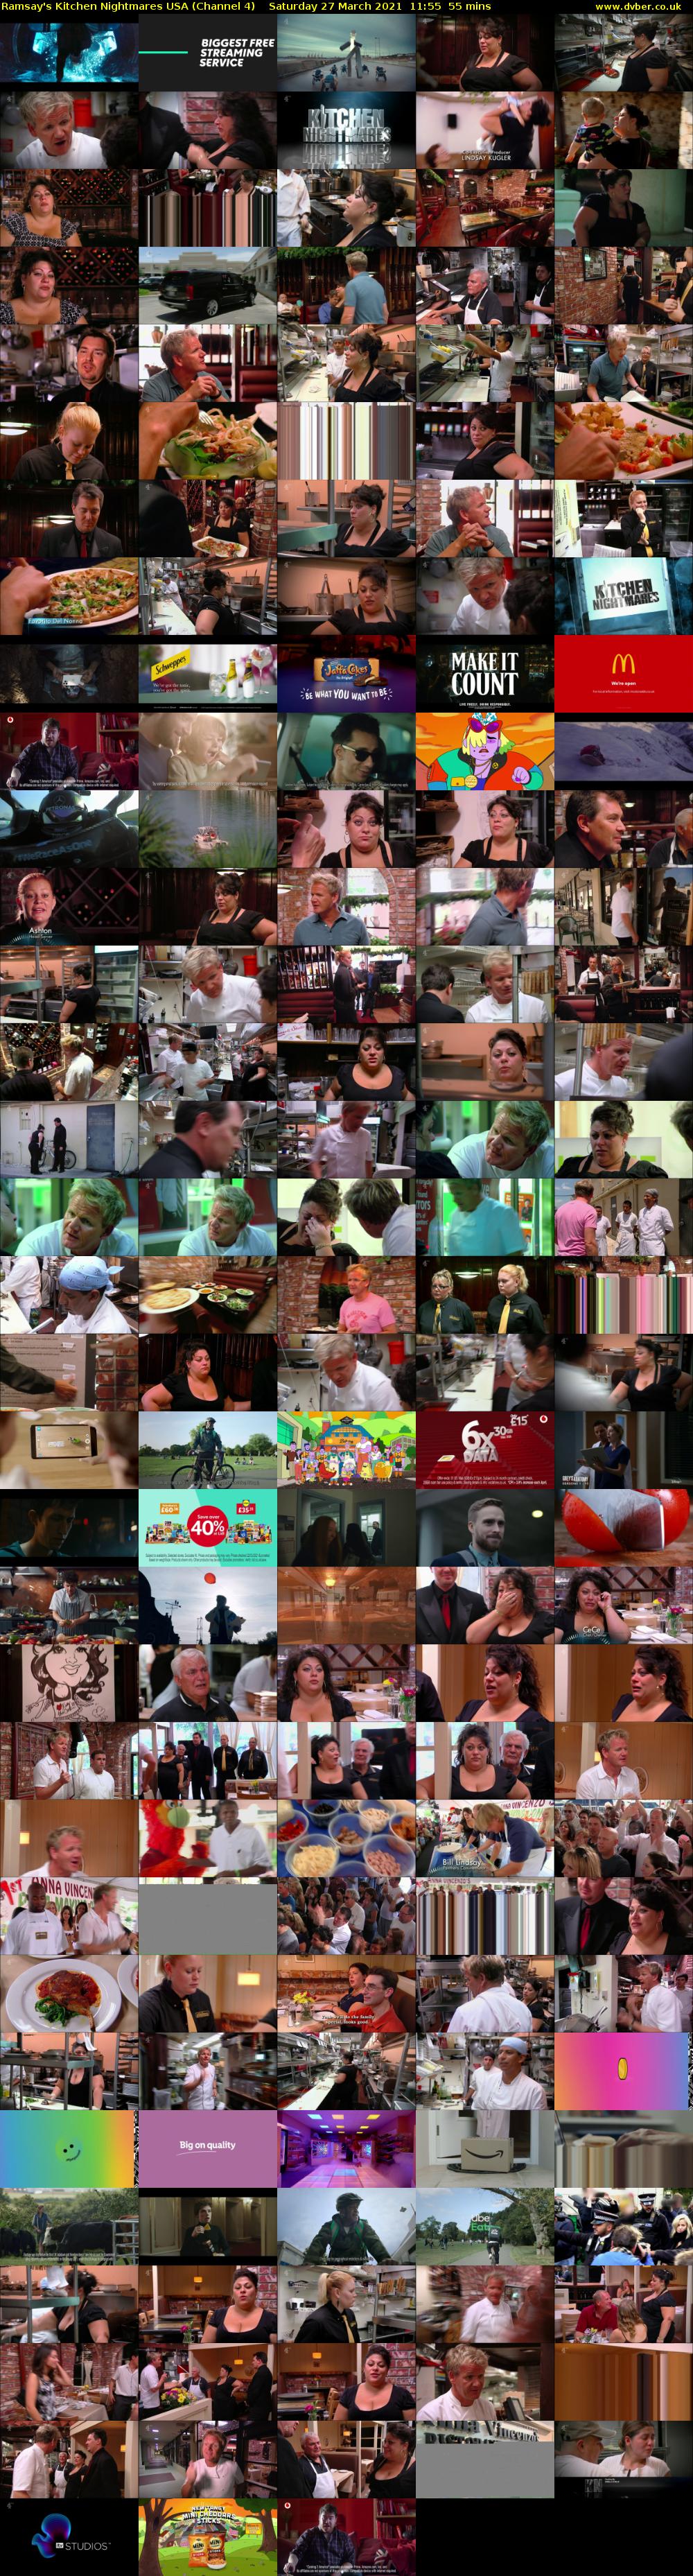 Ramsay's Kitchen Nightmares USA (Channel 4) Saturday 27 March 2021 11:55 - 12:50